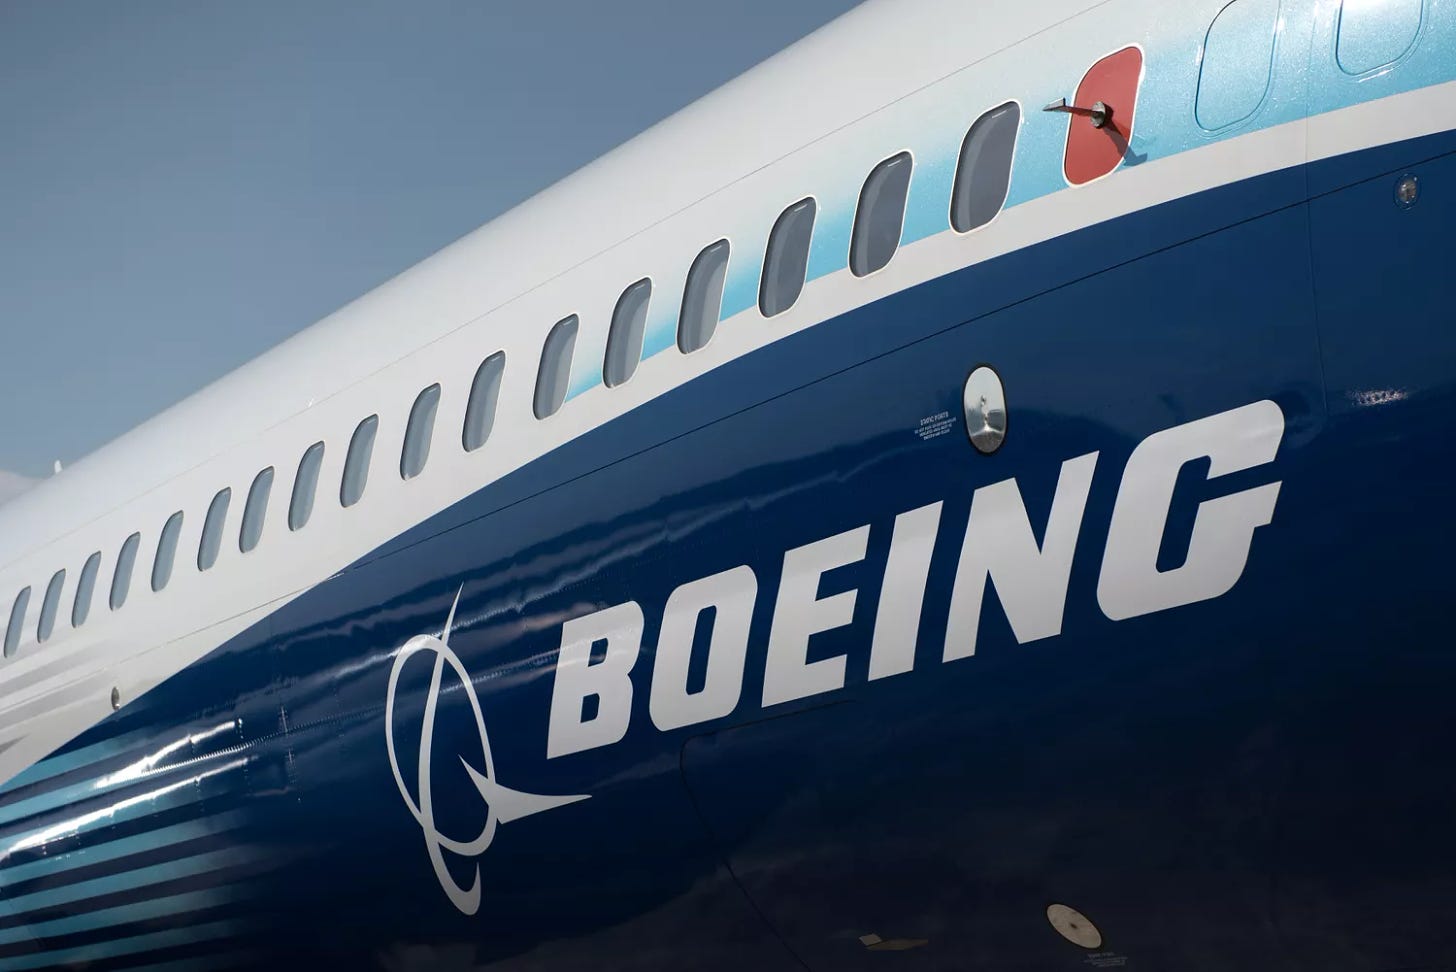 The Boeing logo is seen on the side of a Boeing 737 MAX.